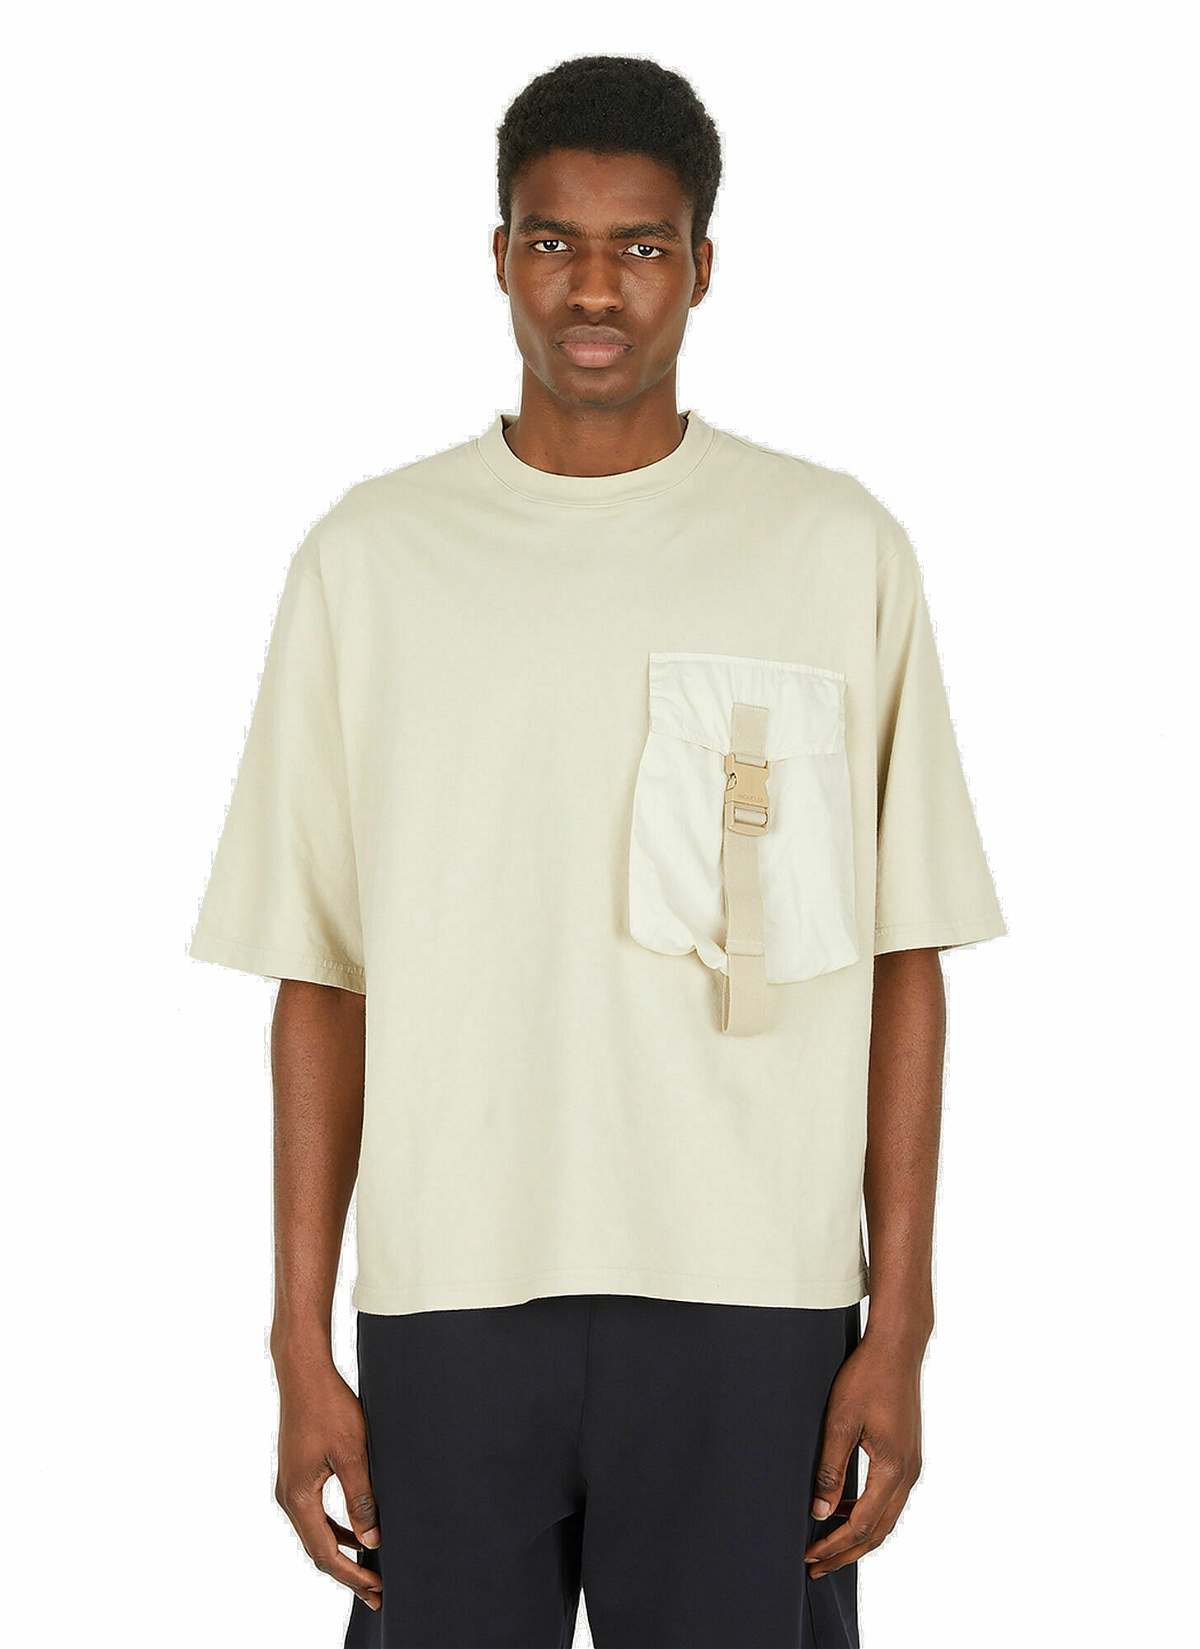 Photo: Buckle Pocket T-Shirt in Grey